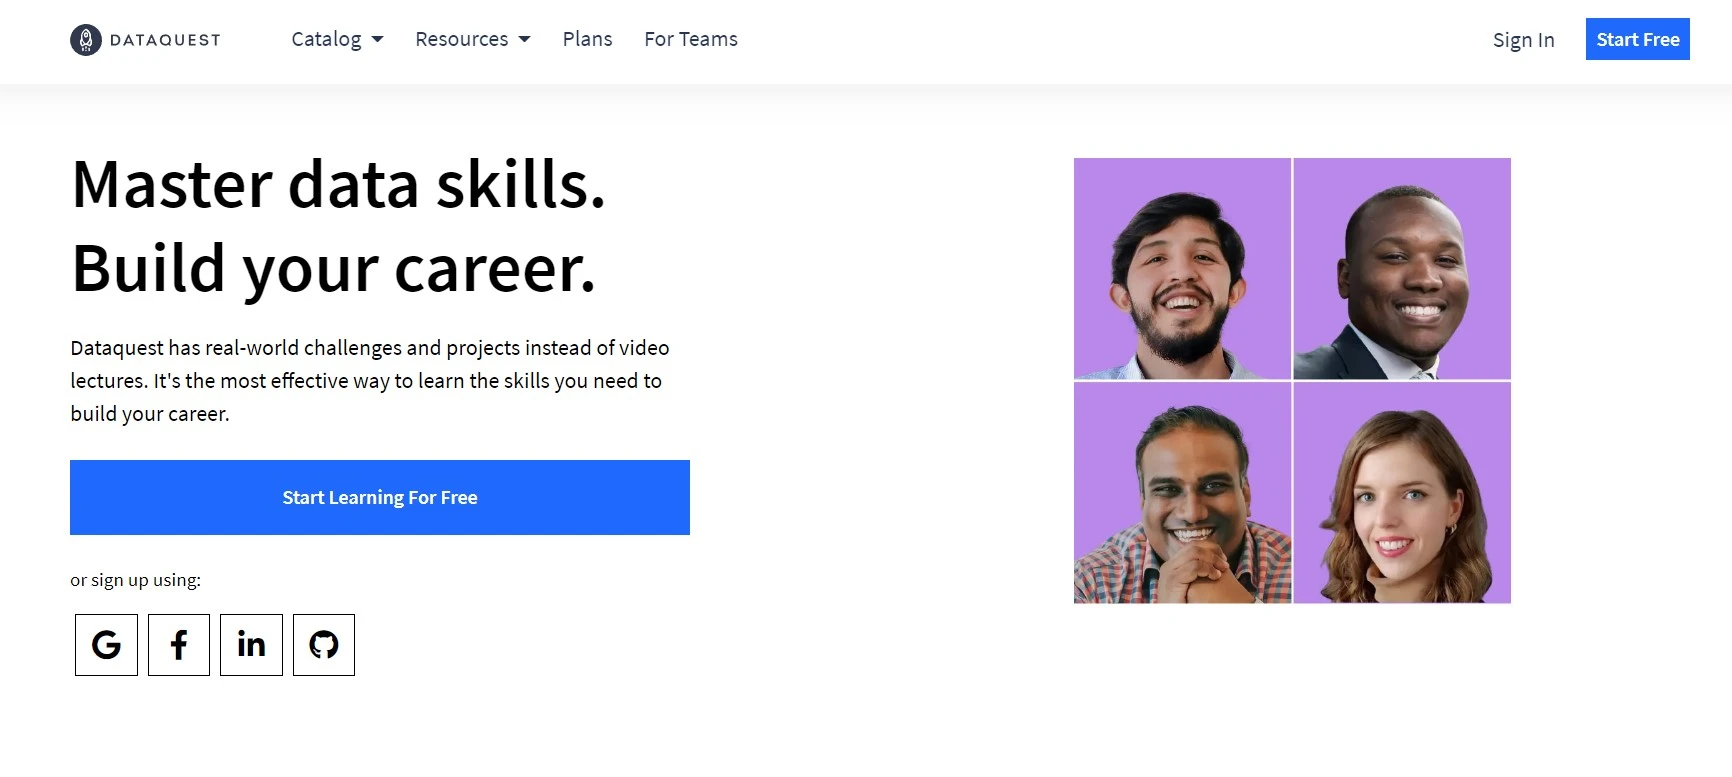 Dataquest helps you master coding skills